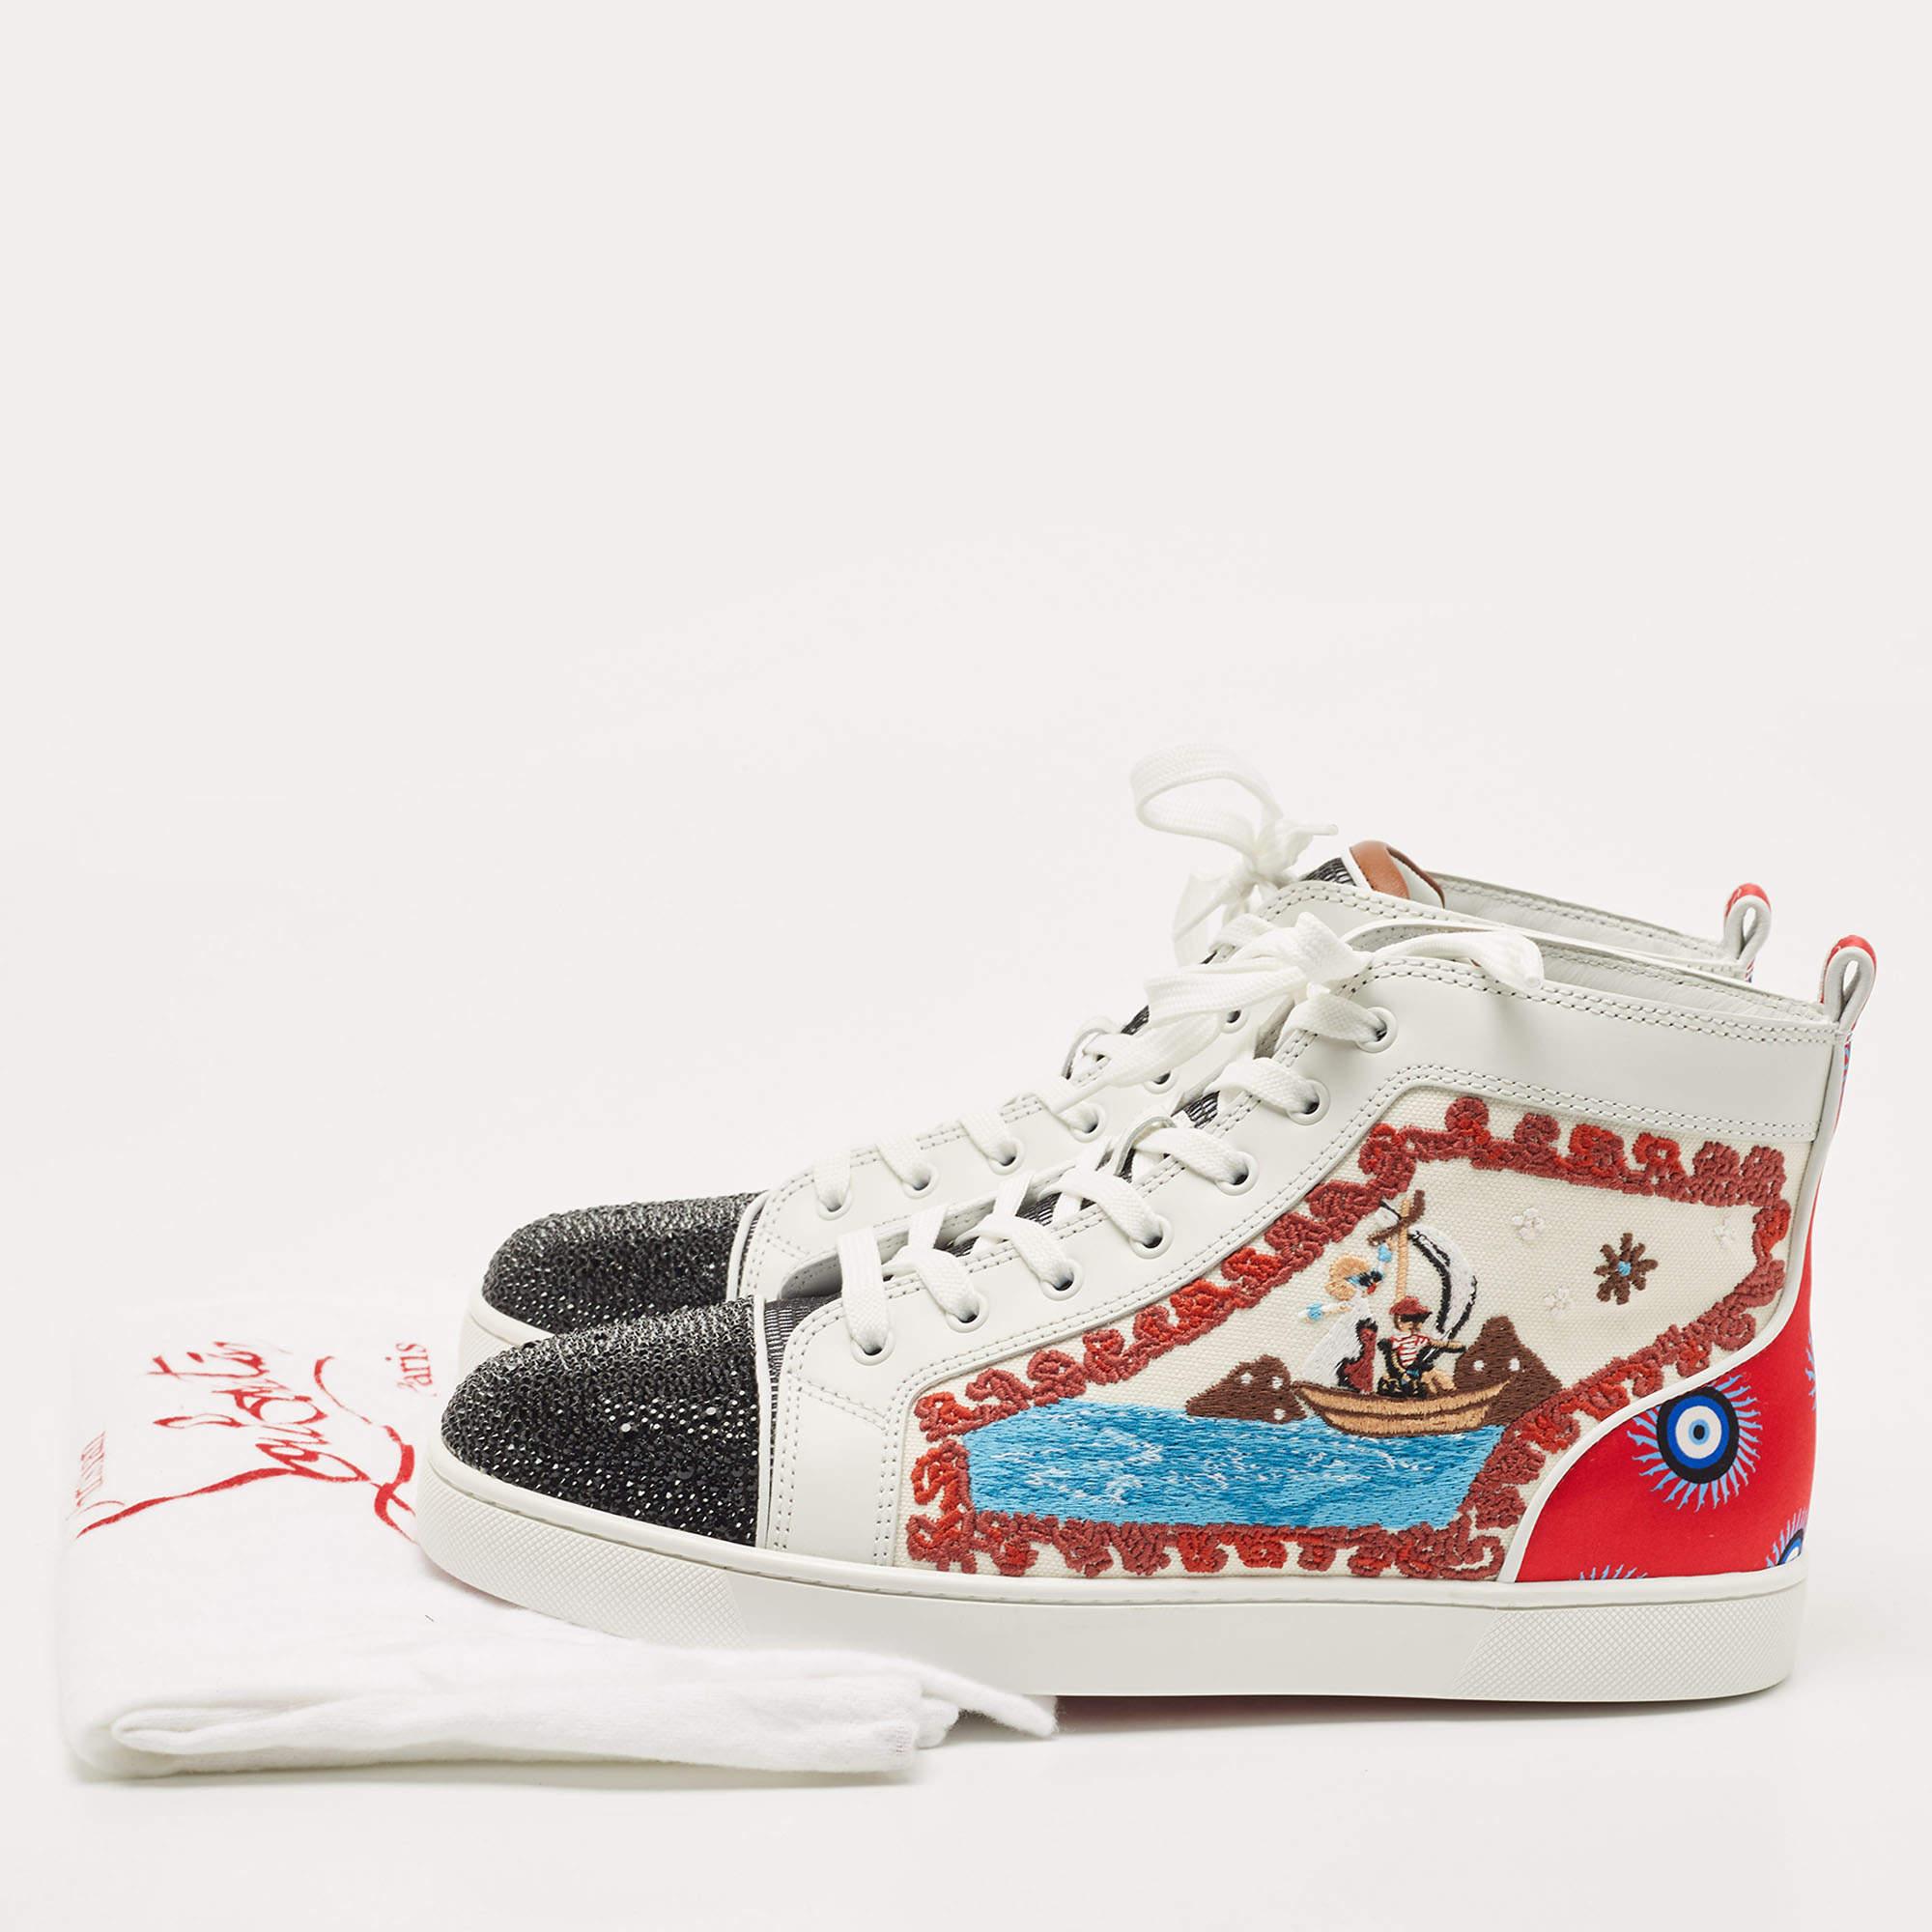 Christian Louboutin Boat Embroidered Canvas and Leather Sneakers Size 44 5